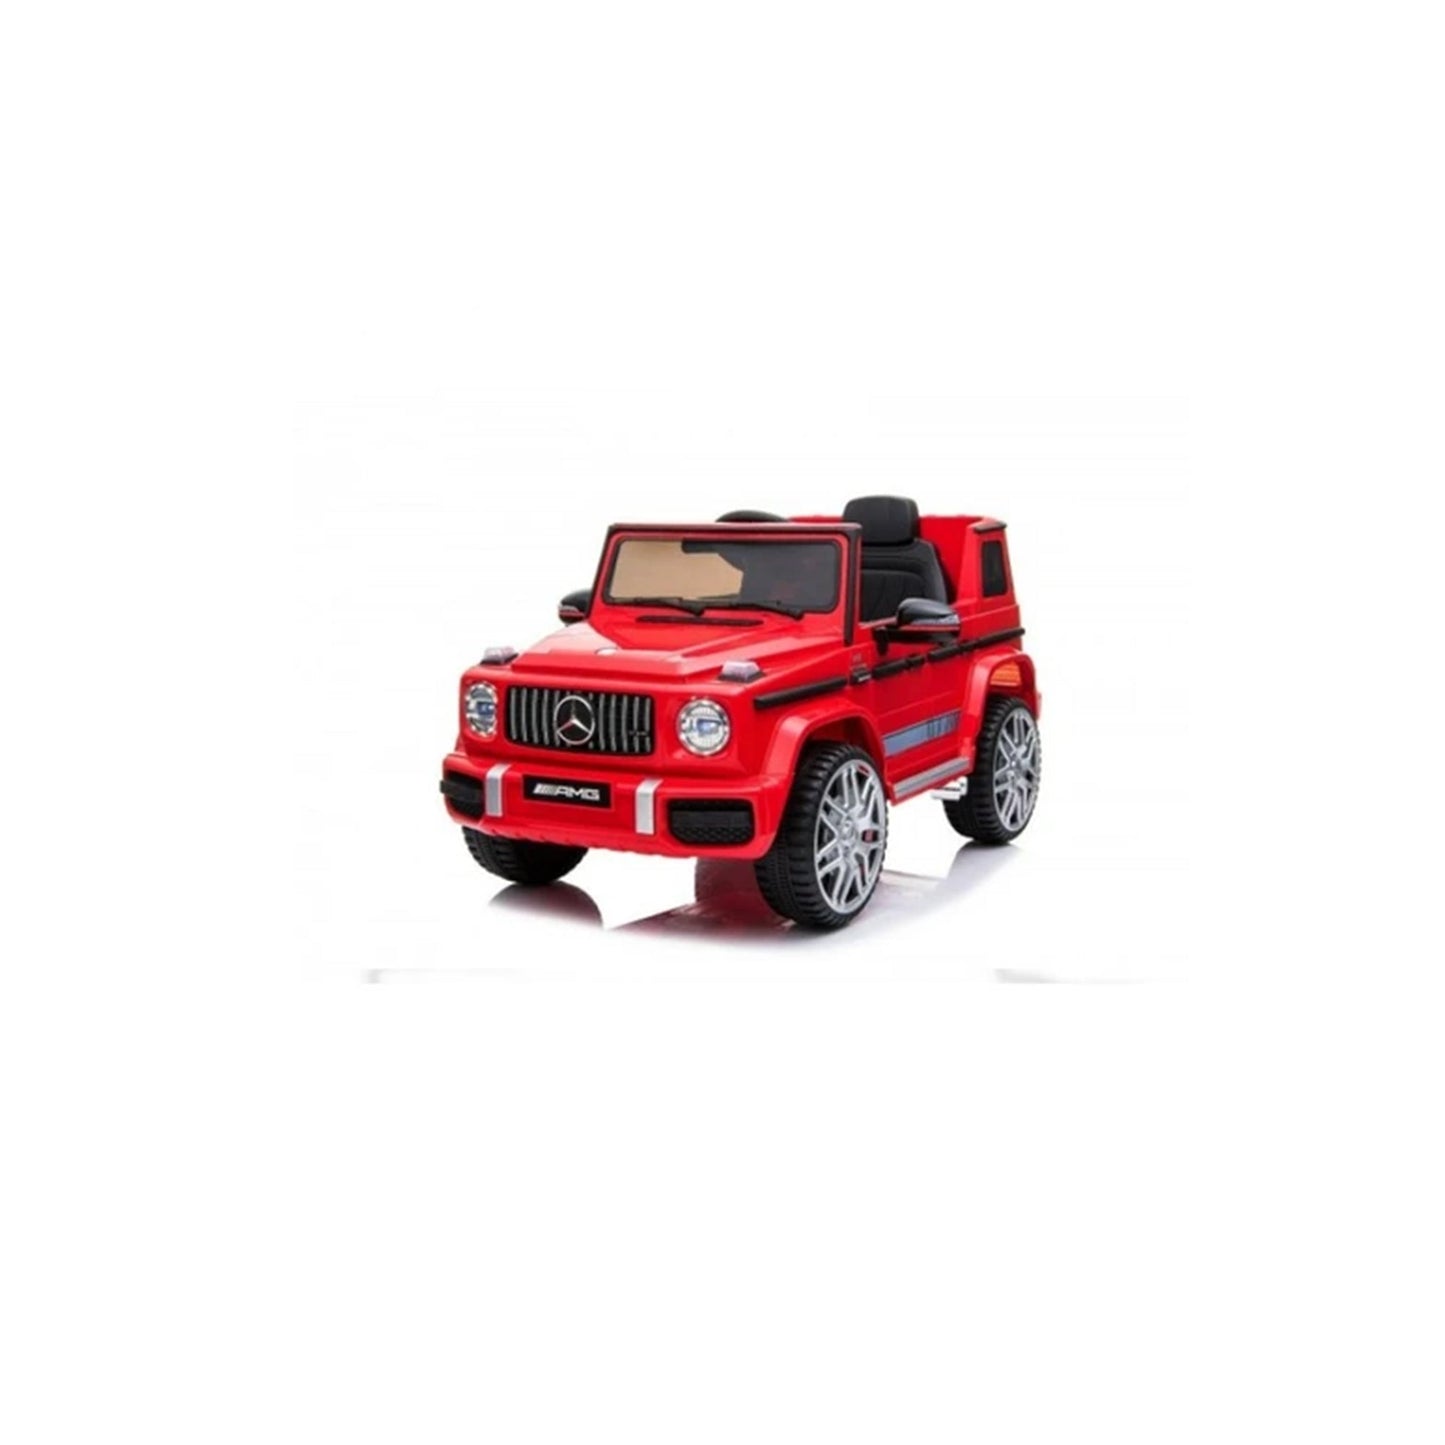 Red Mercedes G63 AMG Electric Kids Ride-On Jeep with Remote Controls at Kids Car Store.